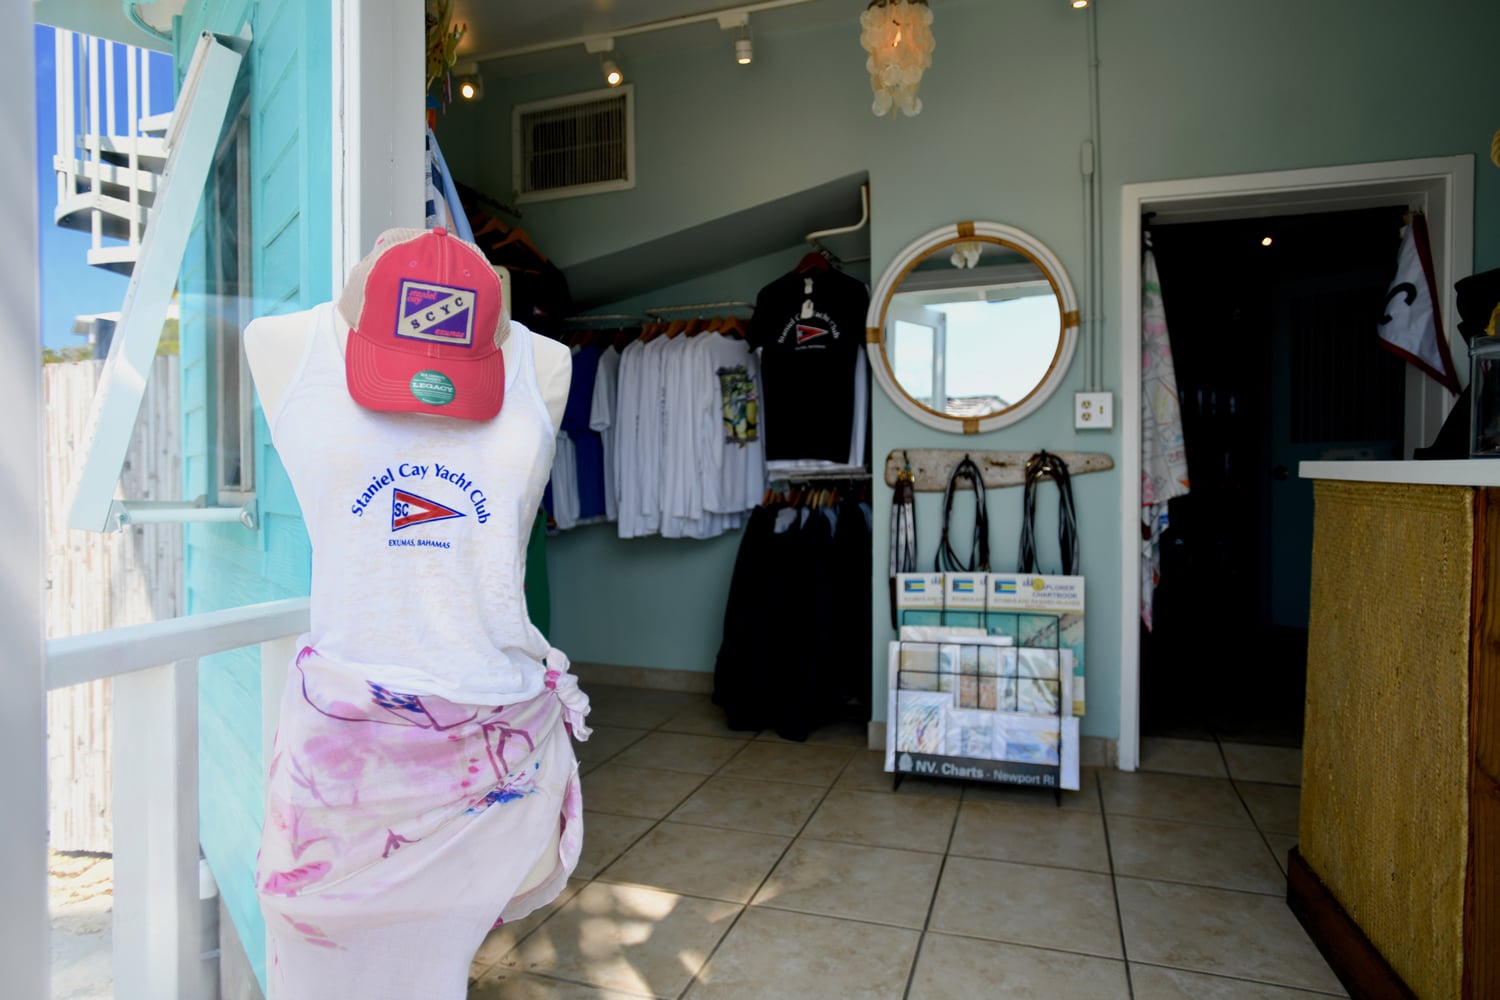 A mannequin wearing a hat stands proudly in front of the Staniel Cay Yacht Club store.